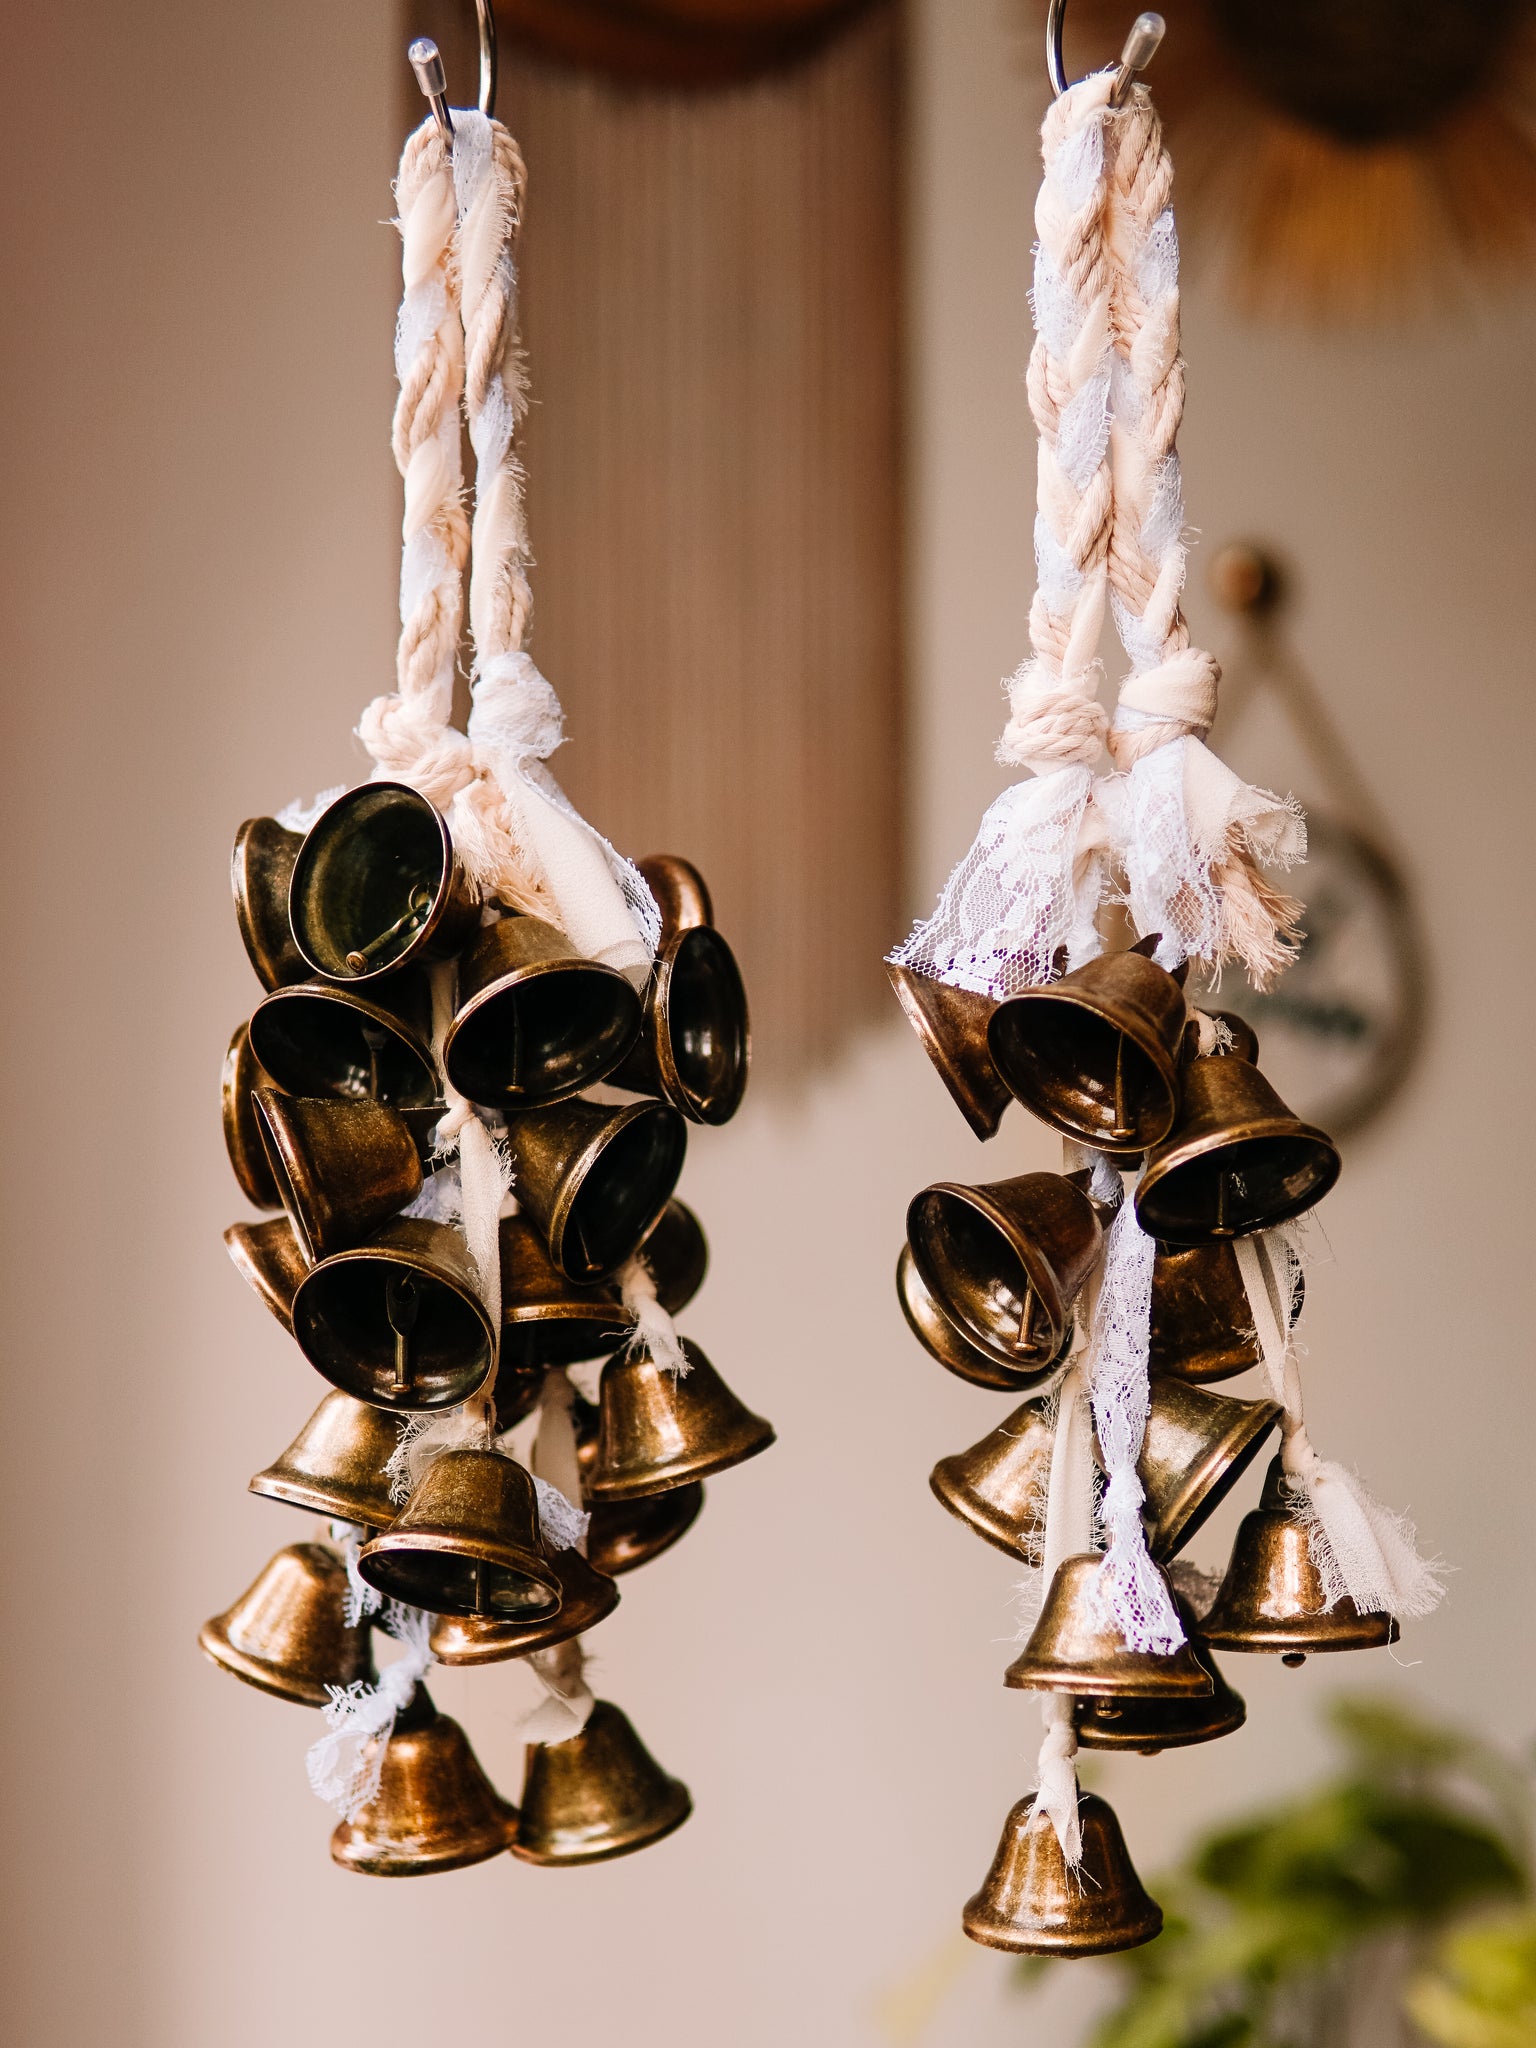 Witch's Bells - hanging bells and spells to protect the home from bad juju